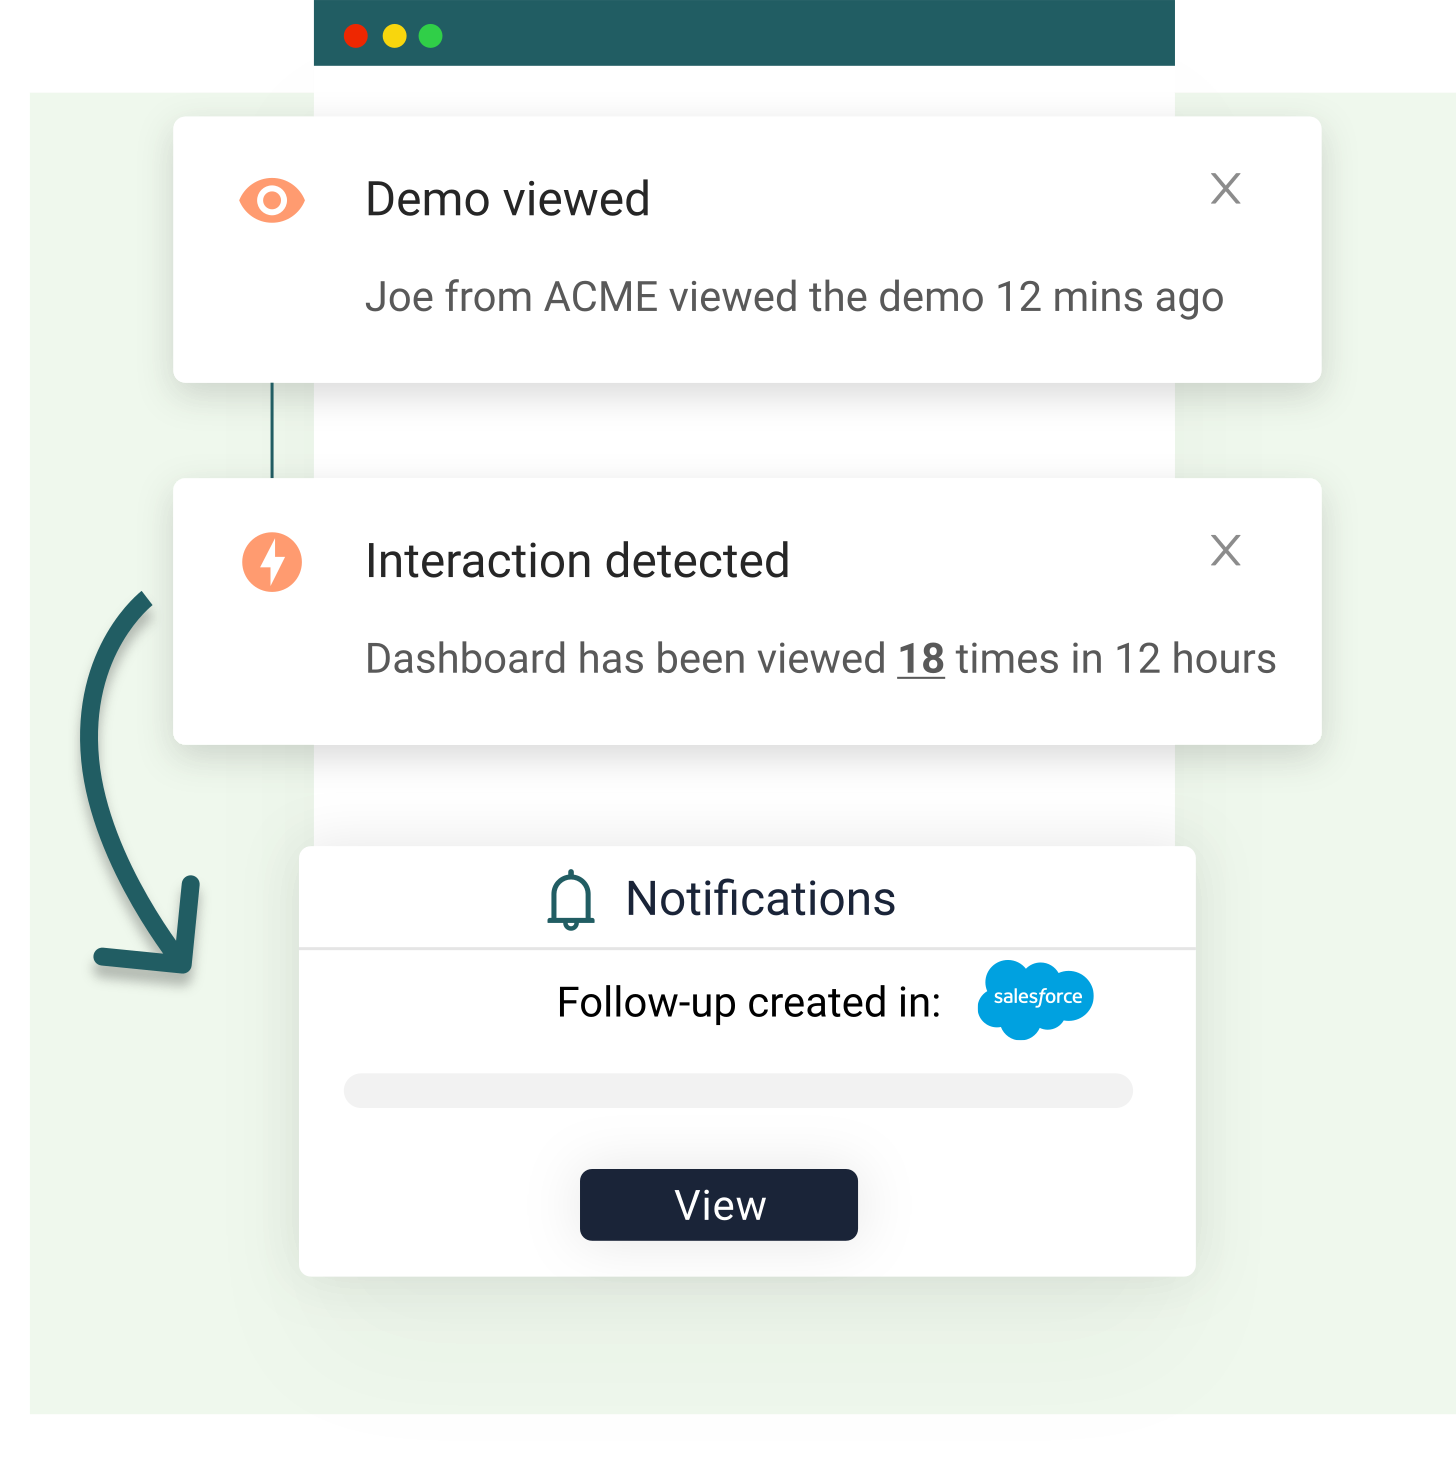 Notification and alerts from demo activity with lead being created